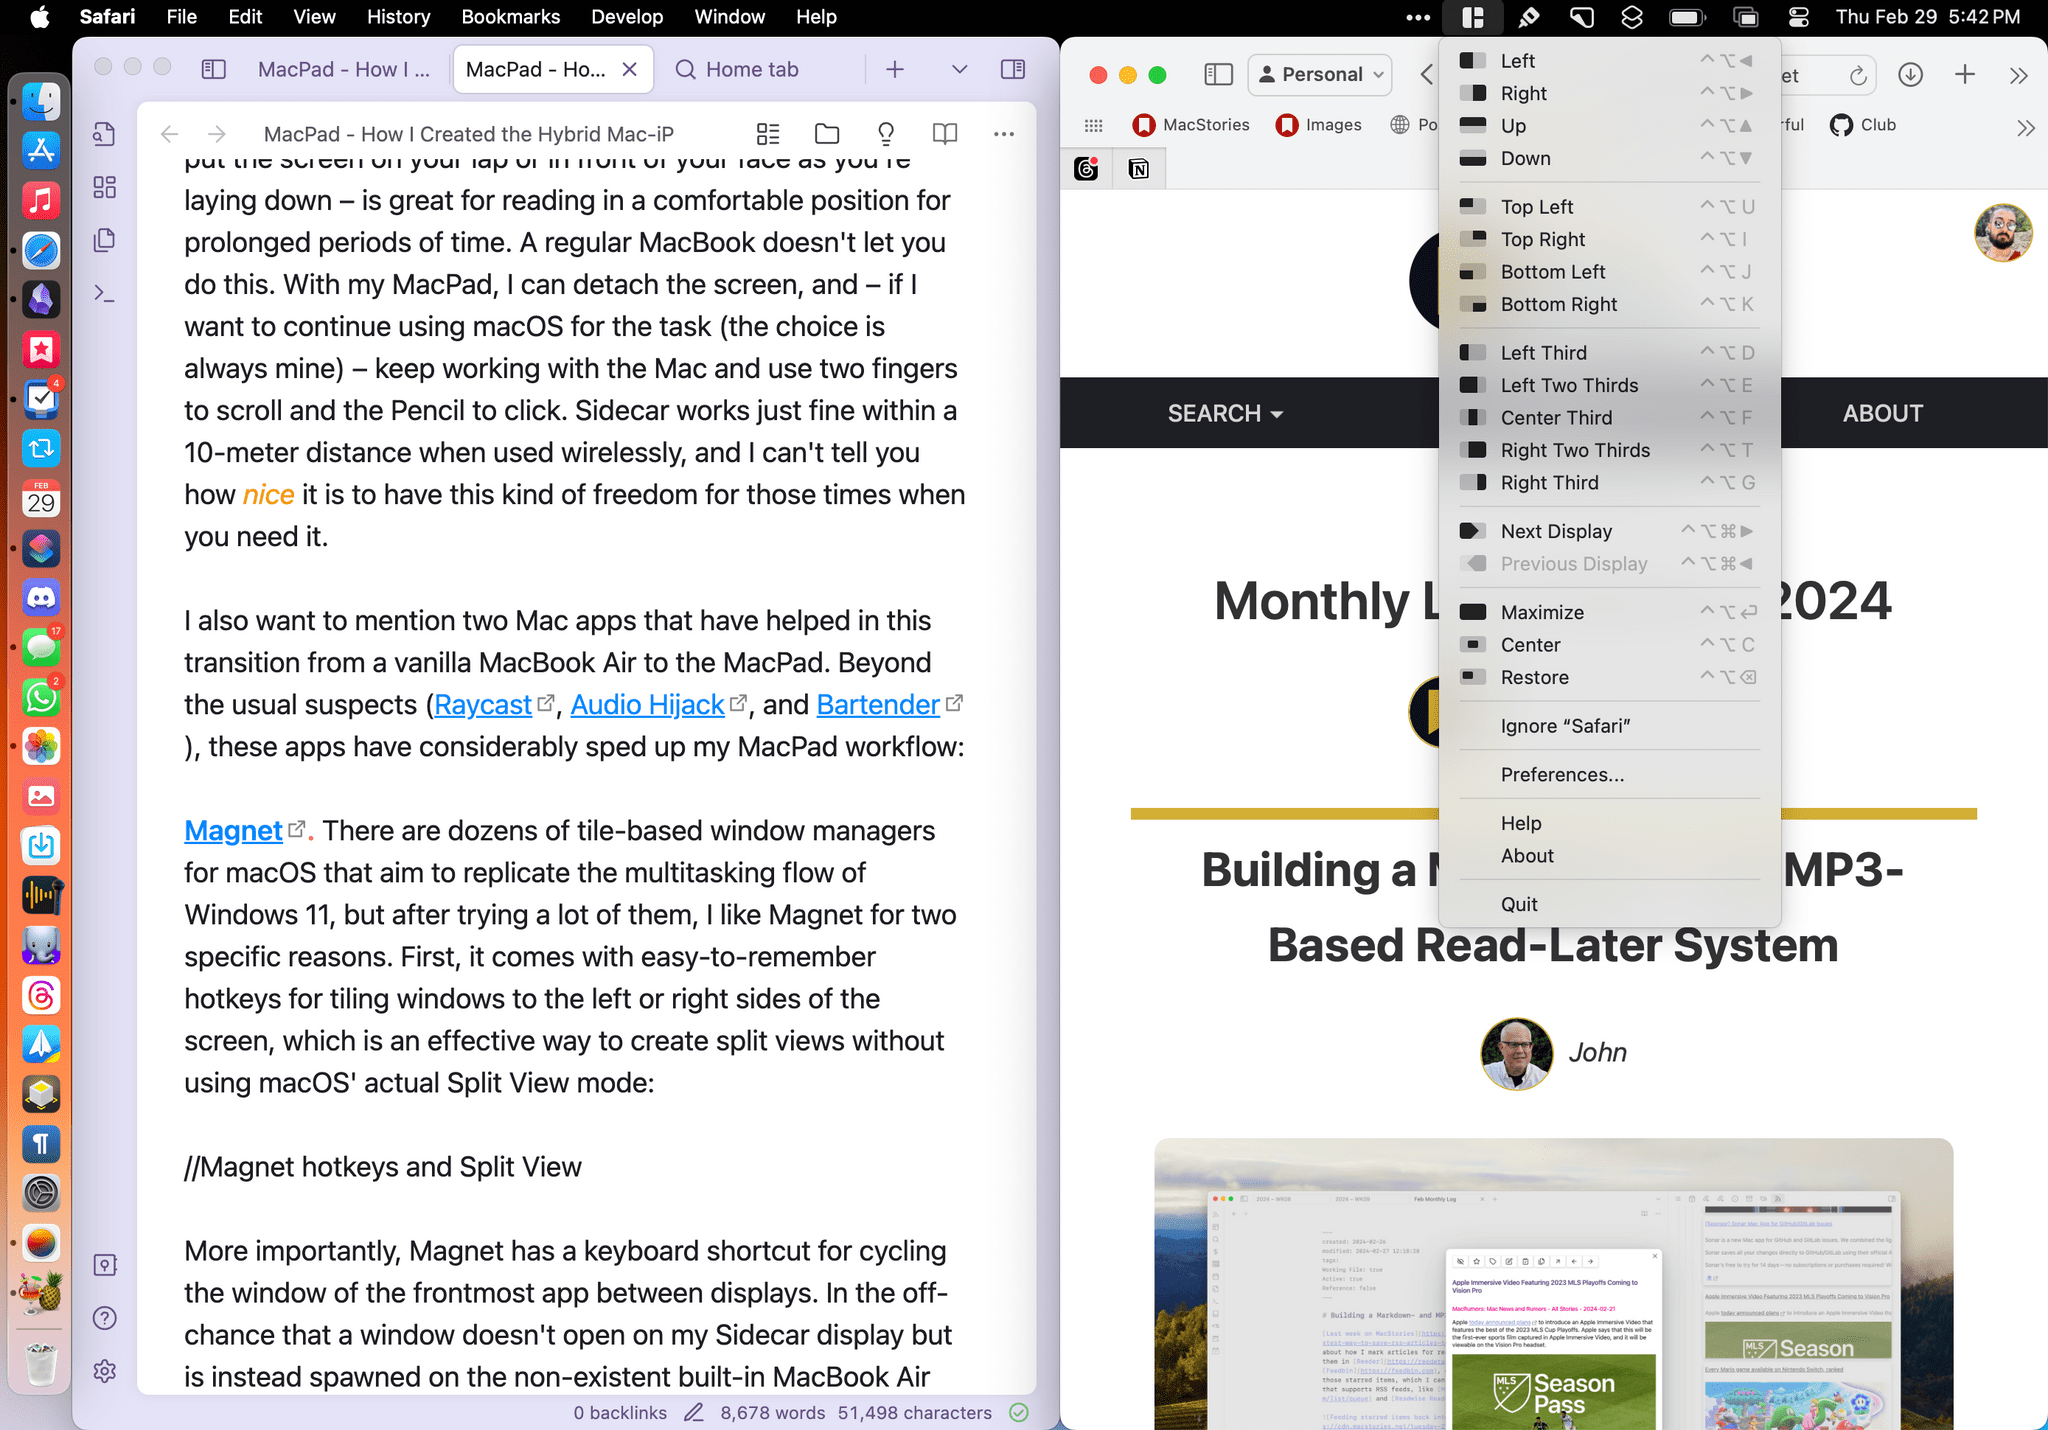 Splitting the screen on macOS with Magnet.